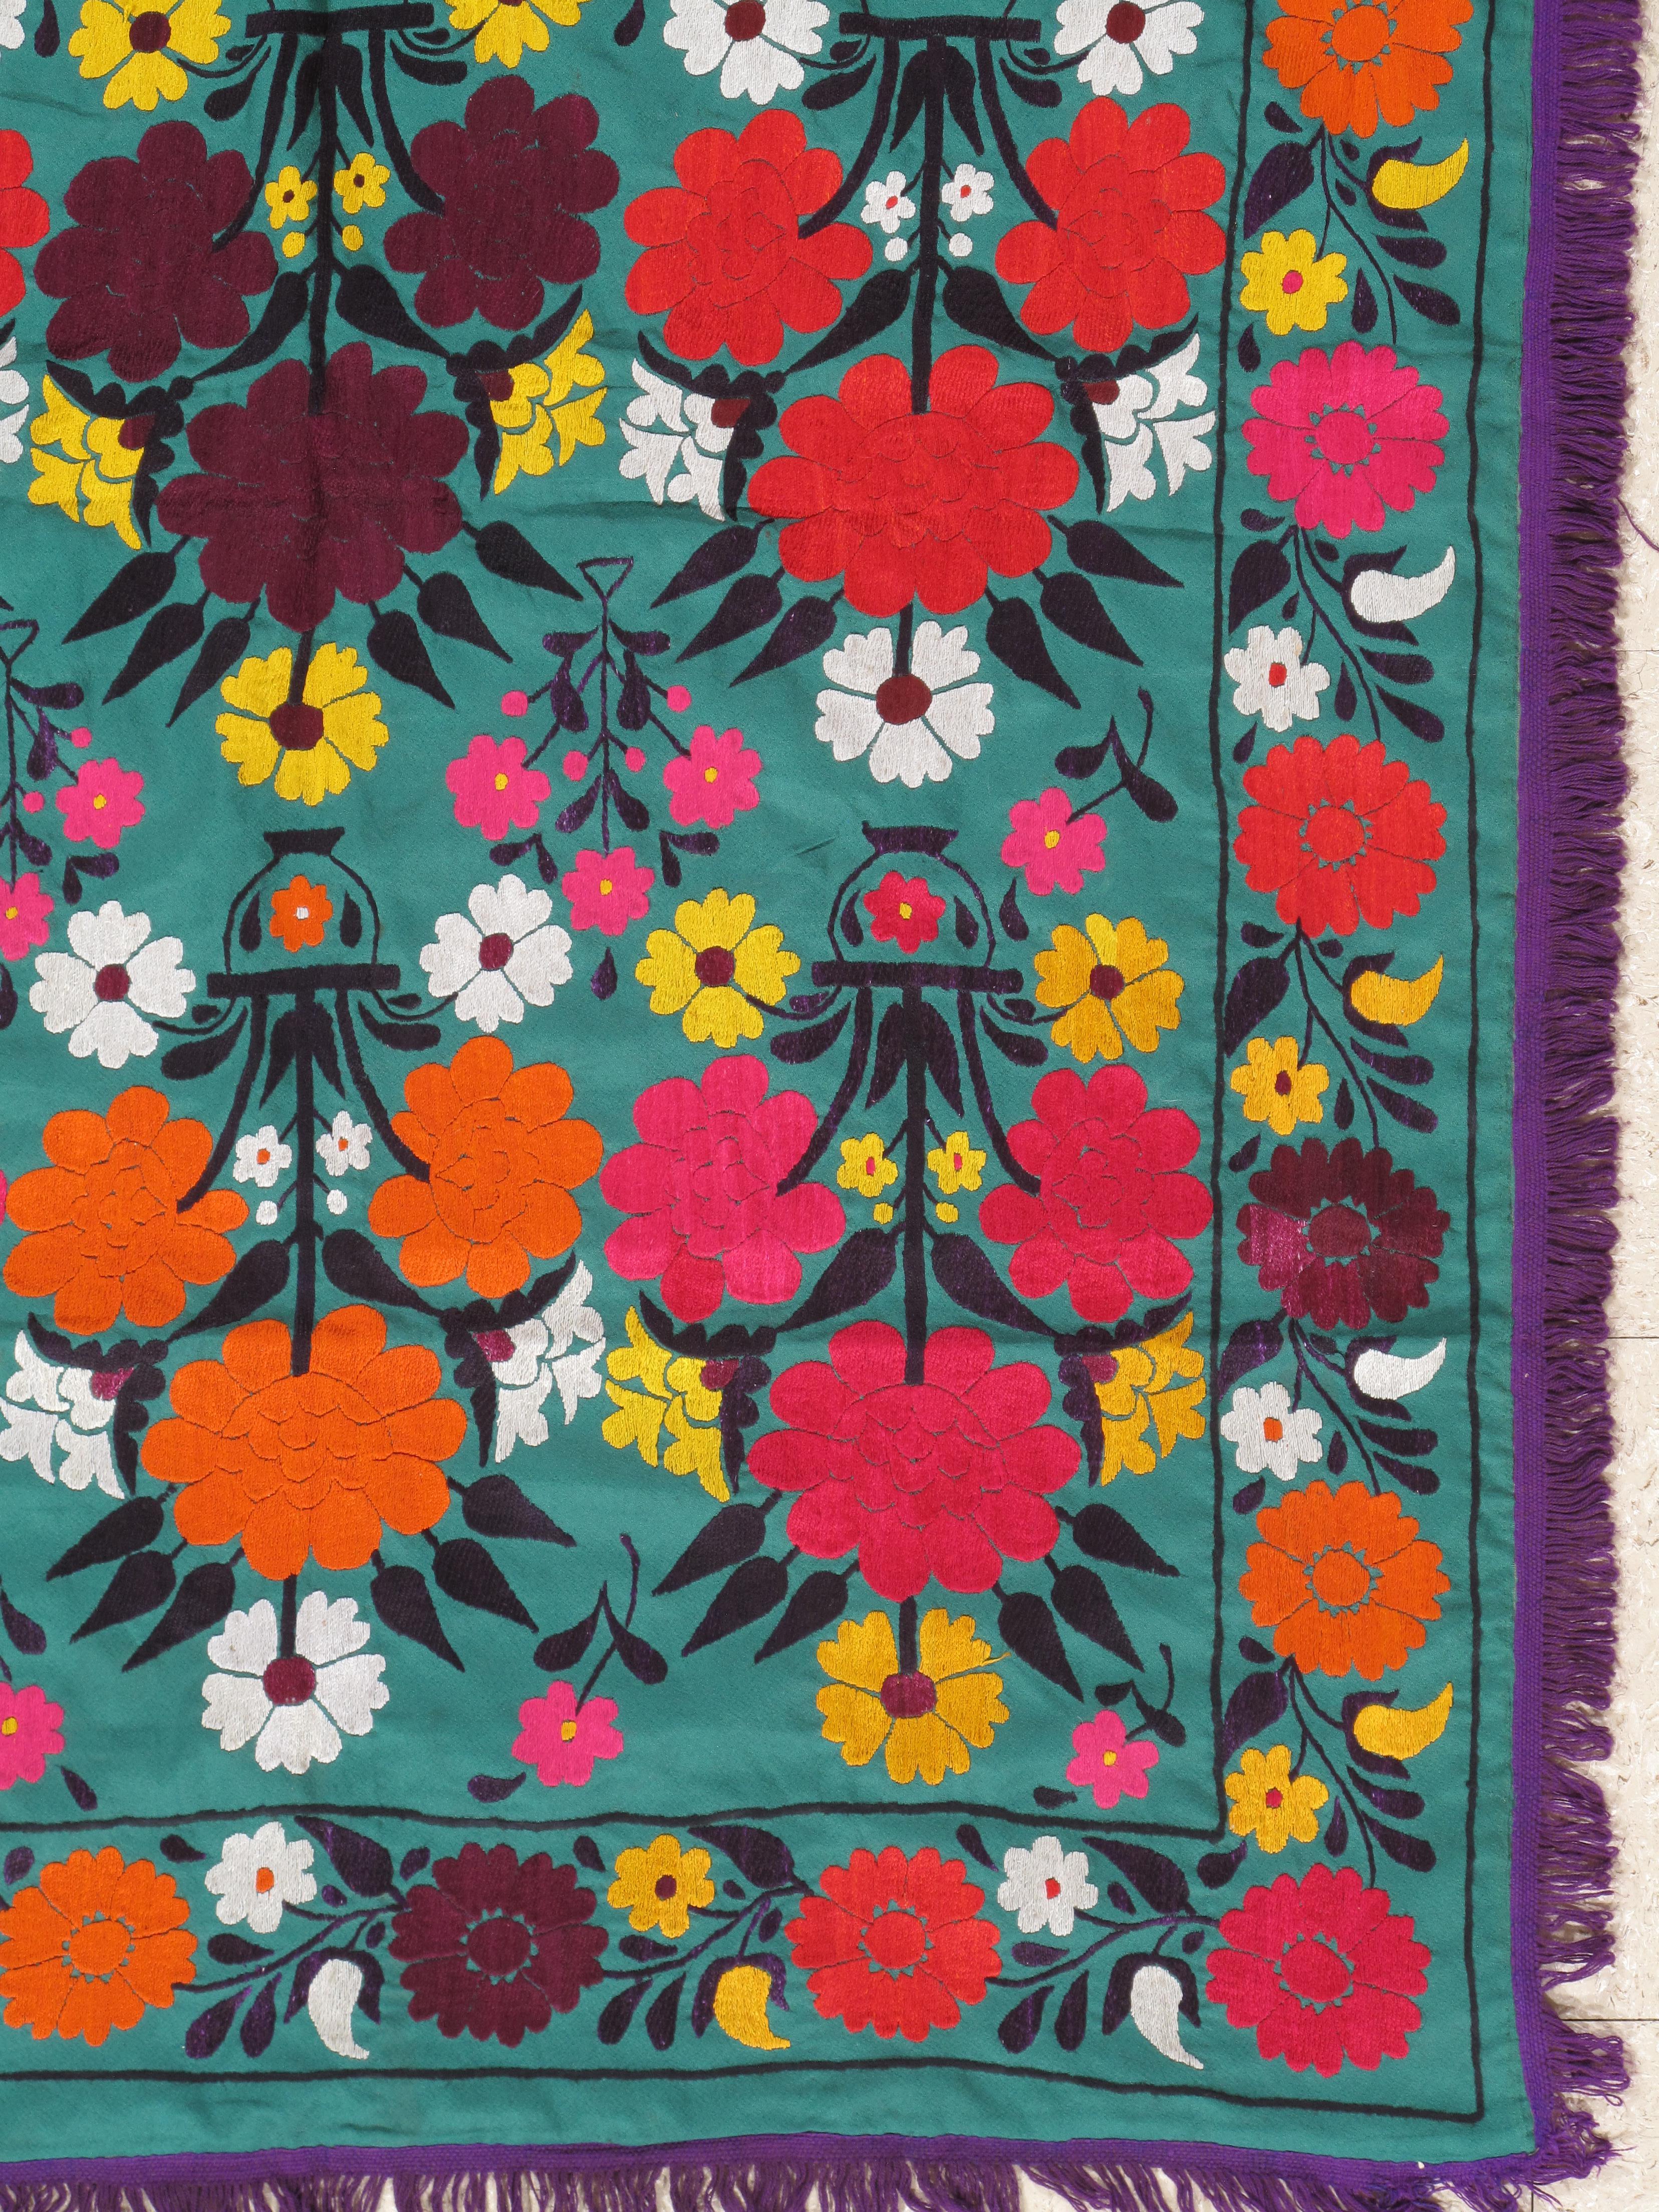 Finely woven cotton-ground Vintage Suzani with hand-embroidery. Fine floral design. This Suzani embroidery has the most noticeable, soporific color pallet. Very fine, 20th century Suzani textile. With vibrant silk highlights. 

Measures: 3'7